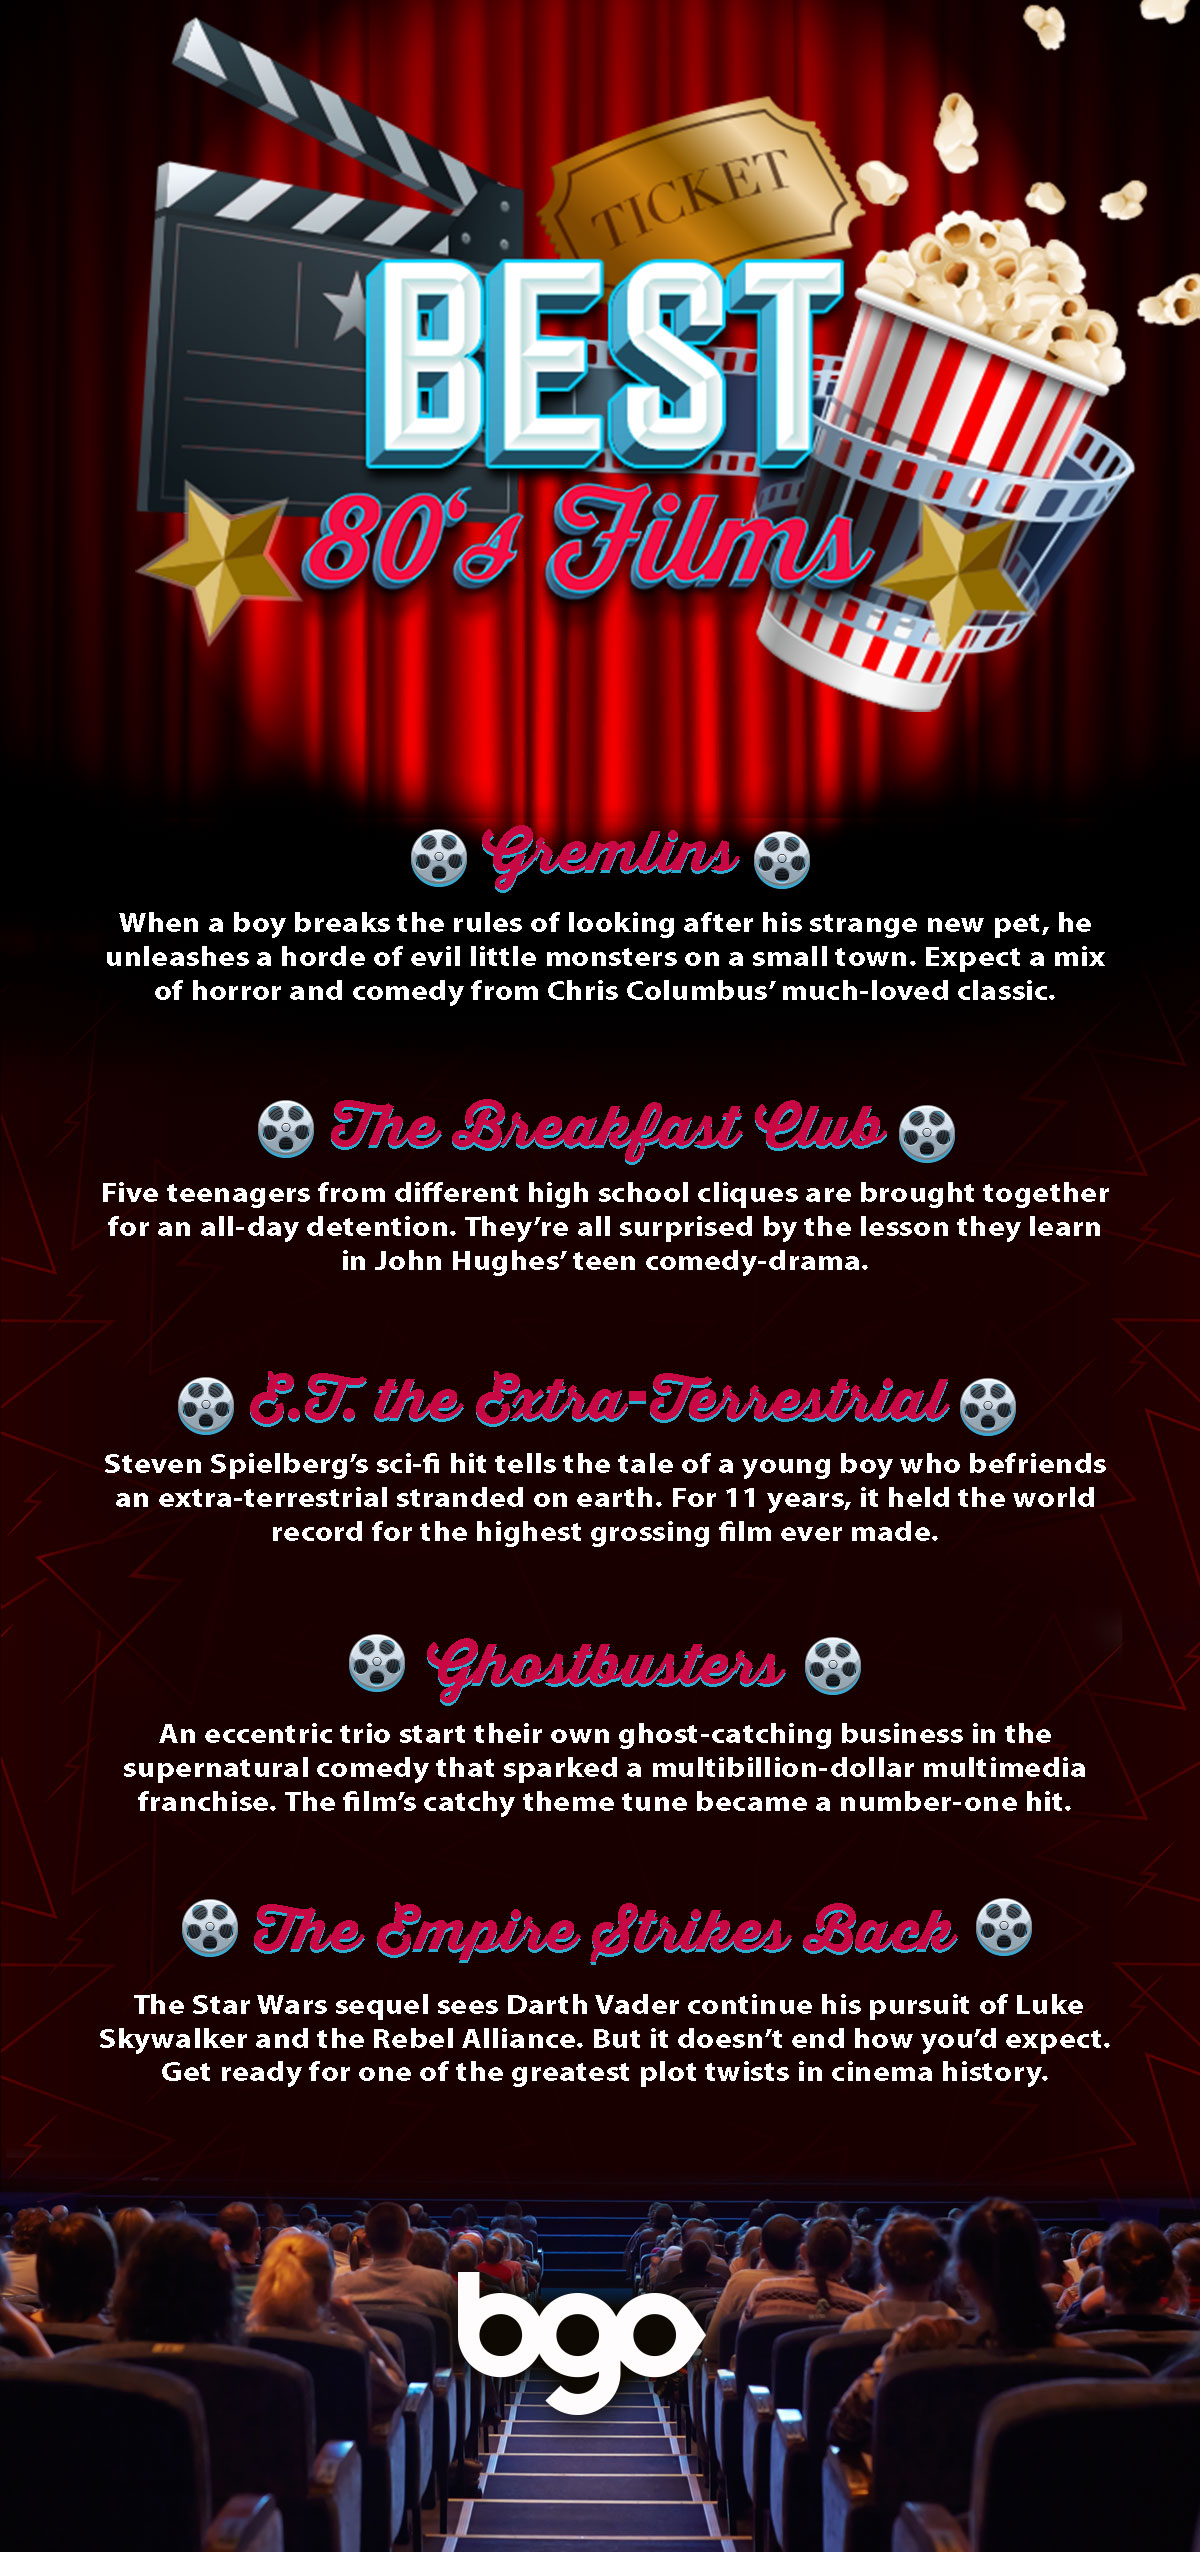 Best 80s Films infographic